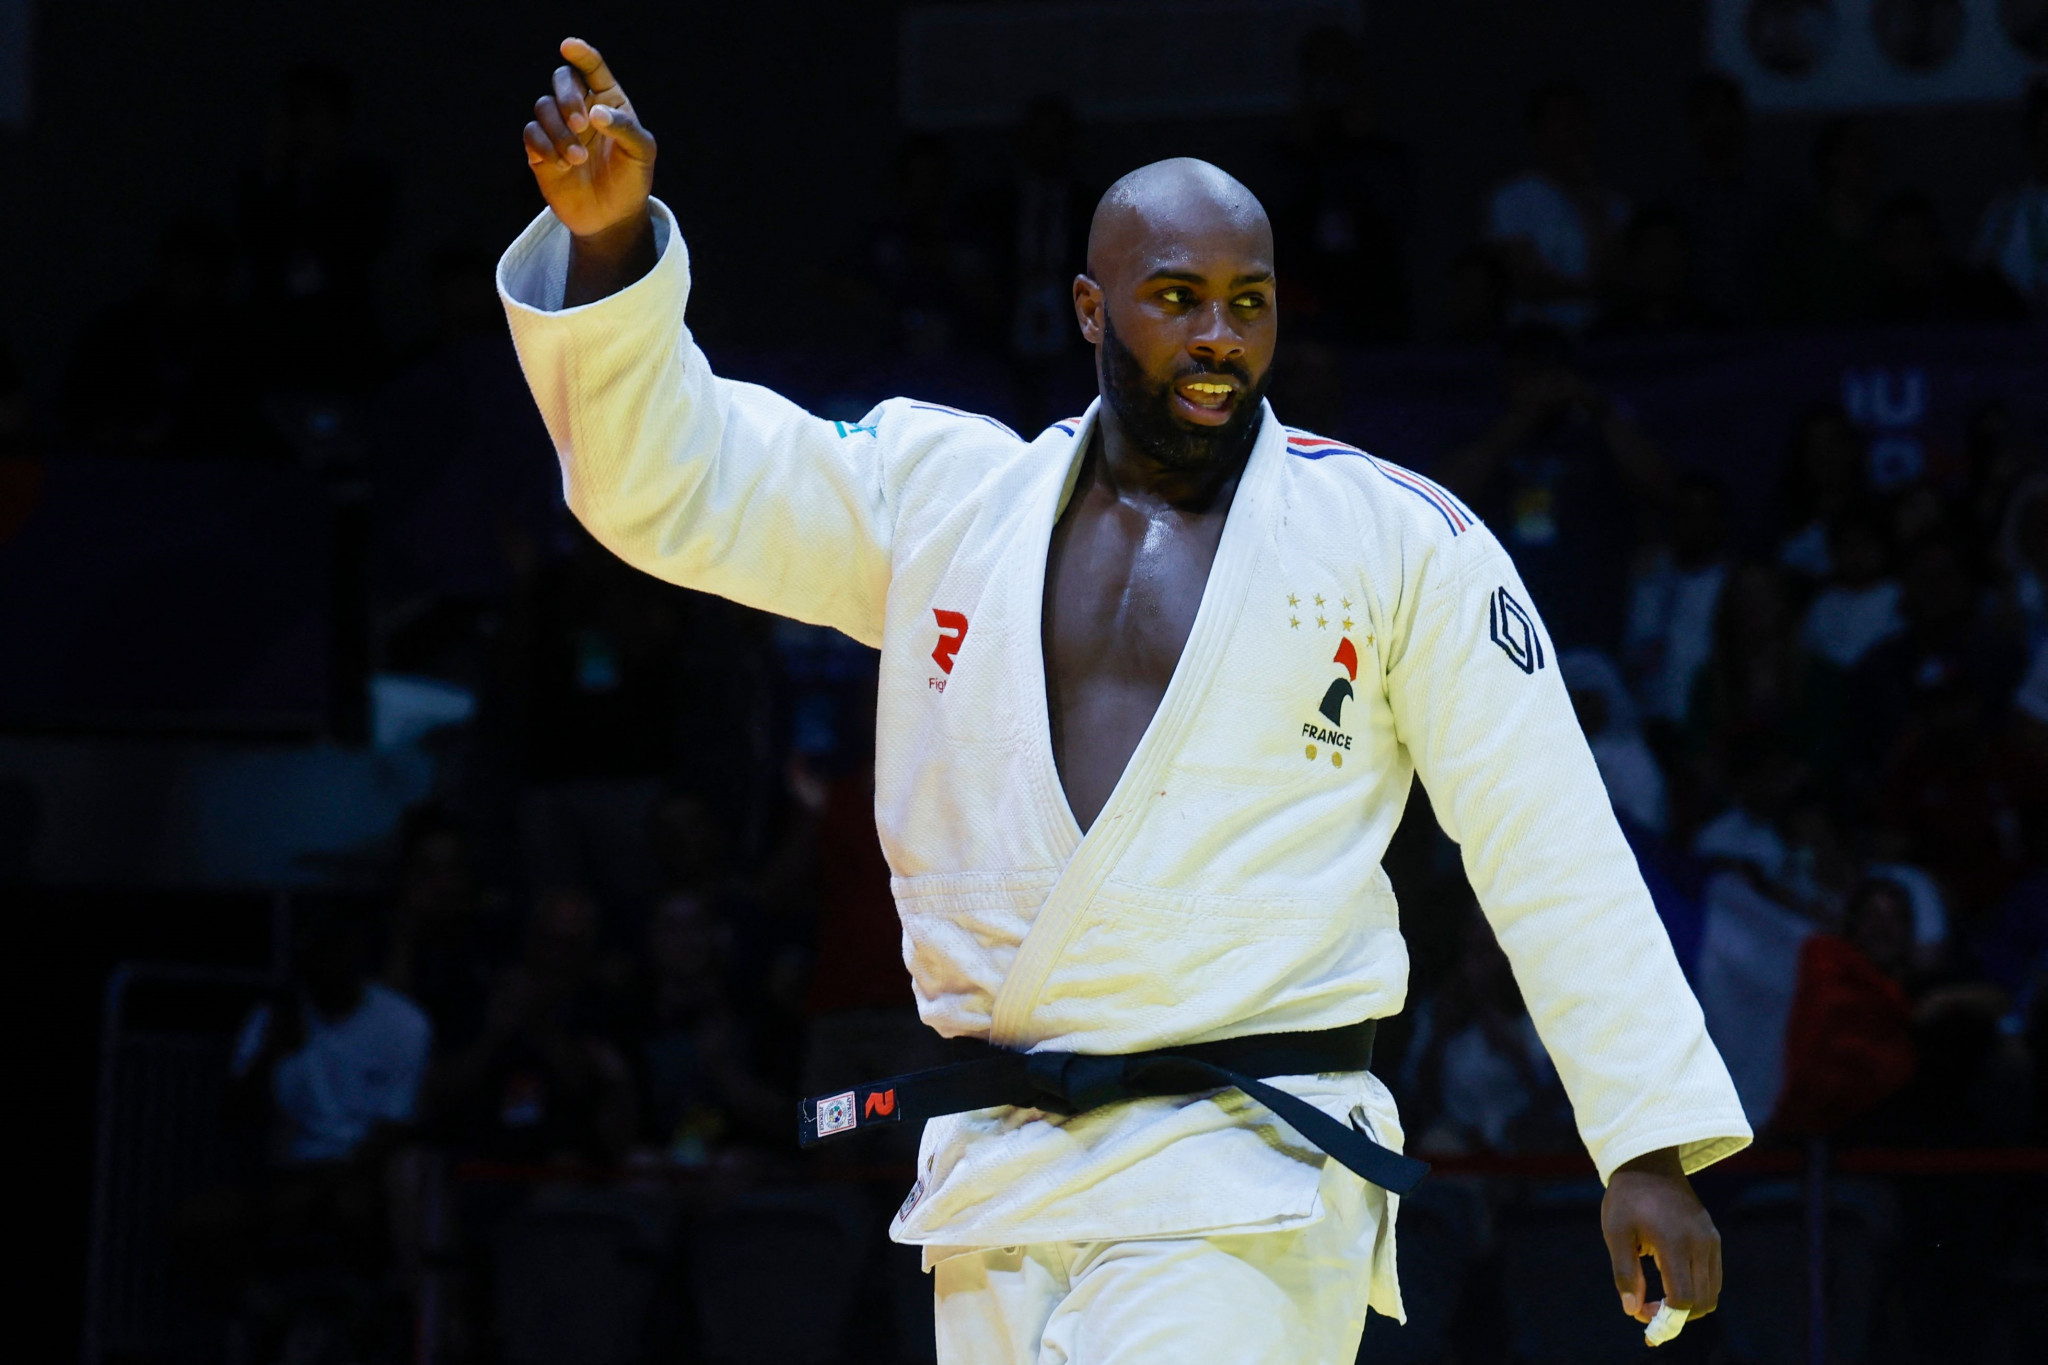 Teddy Riner, sporting the Renault logo on his left sleeve, captured his 11th world title in the Qatari capital ©Getty Images